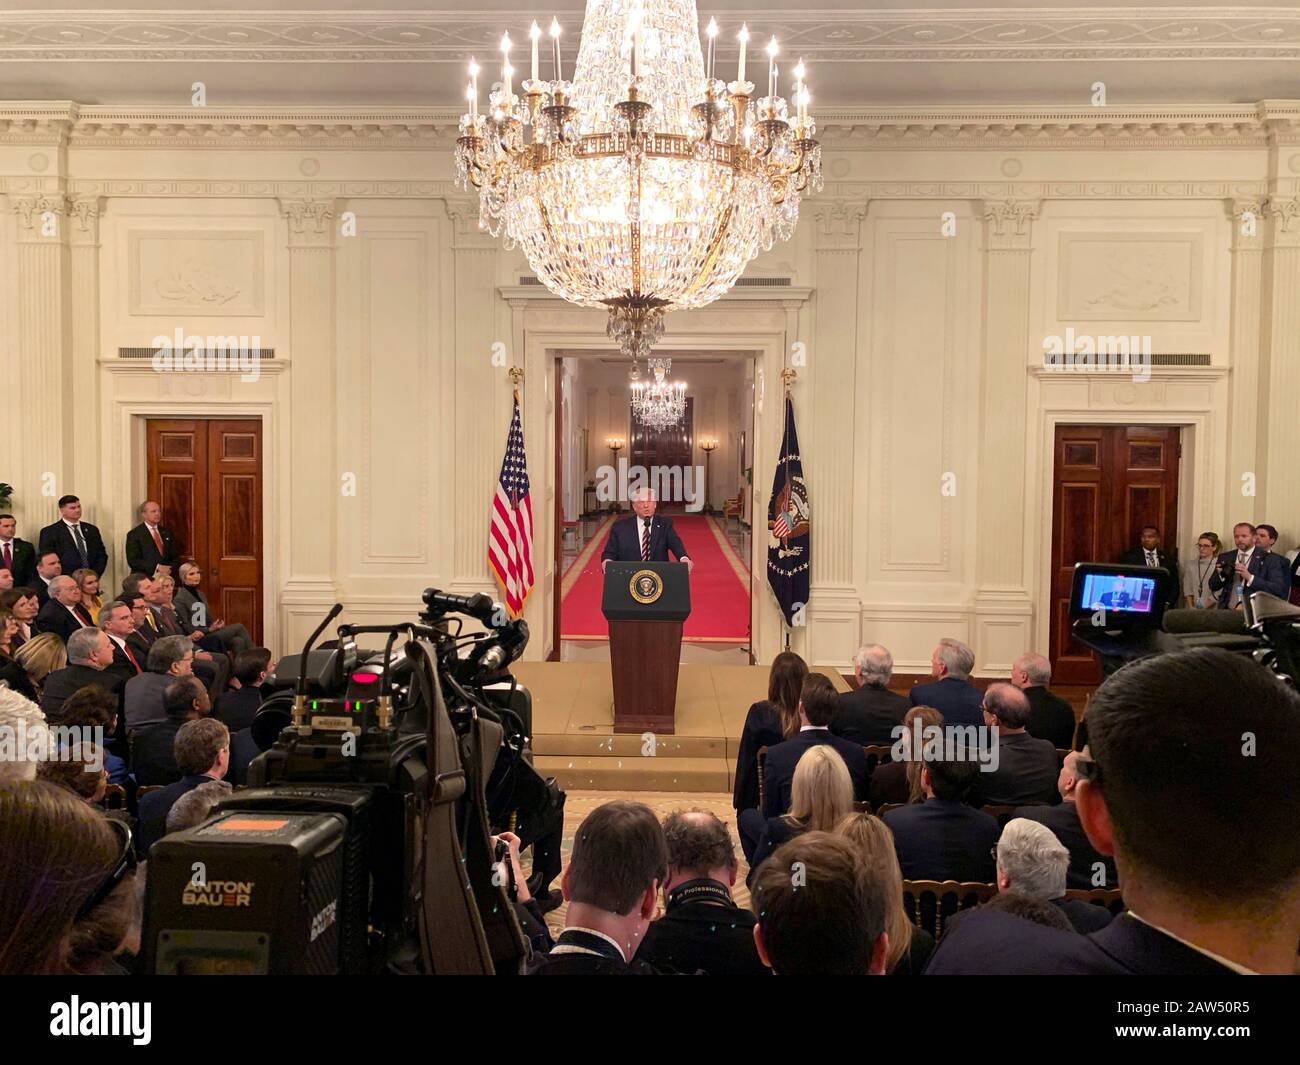 Washington, United States of America. 06 February, 2020. U.S President Donald Trump addresses remarks during an hour long celebration of his acquittal in the East Room of the White House February 6, 2020 in Washington, D.C. Trump continued to savage his opponents calling them vicious and mean following his Senate acquittal in the impeachment trial. Credit: Shealah Craighead/White House Photo/Alamy Live News Stock Photo